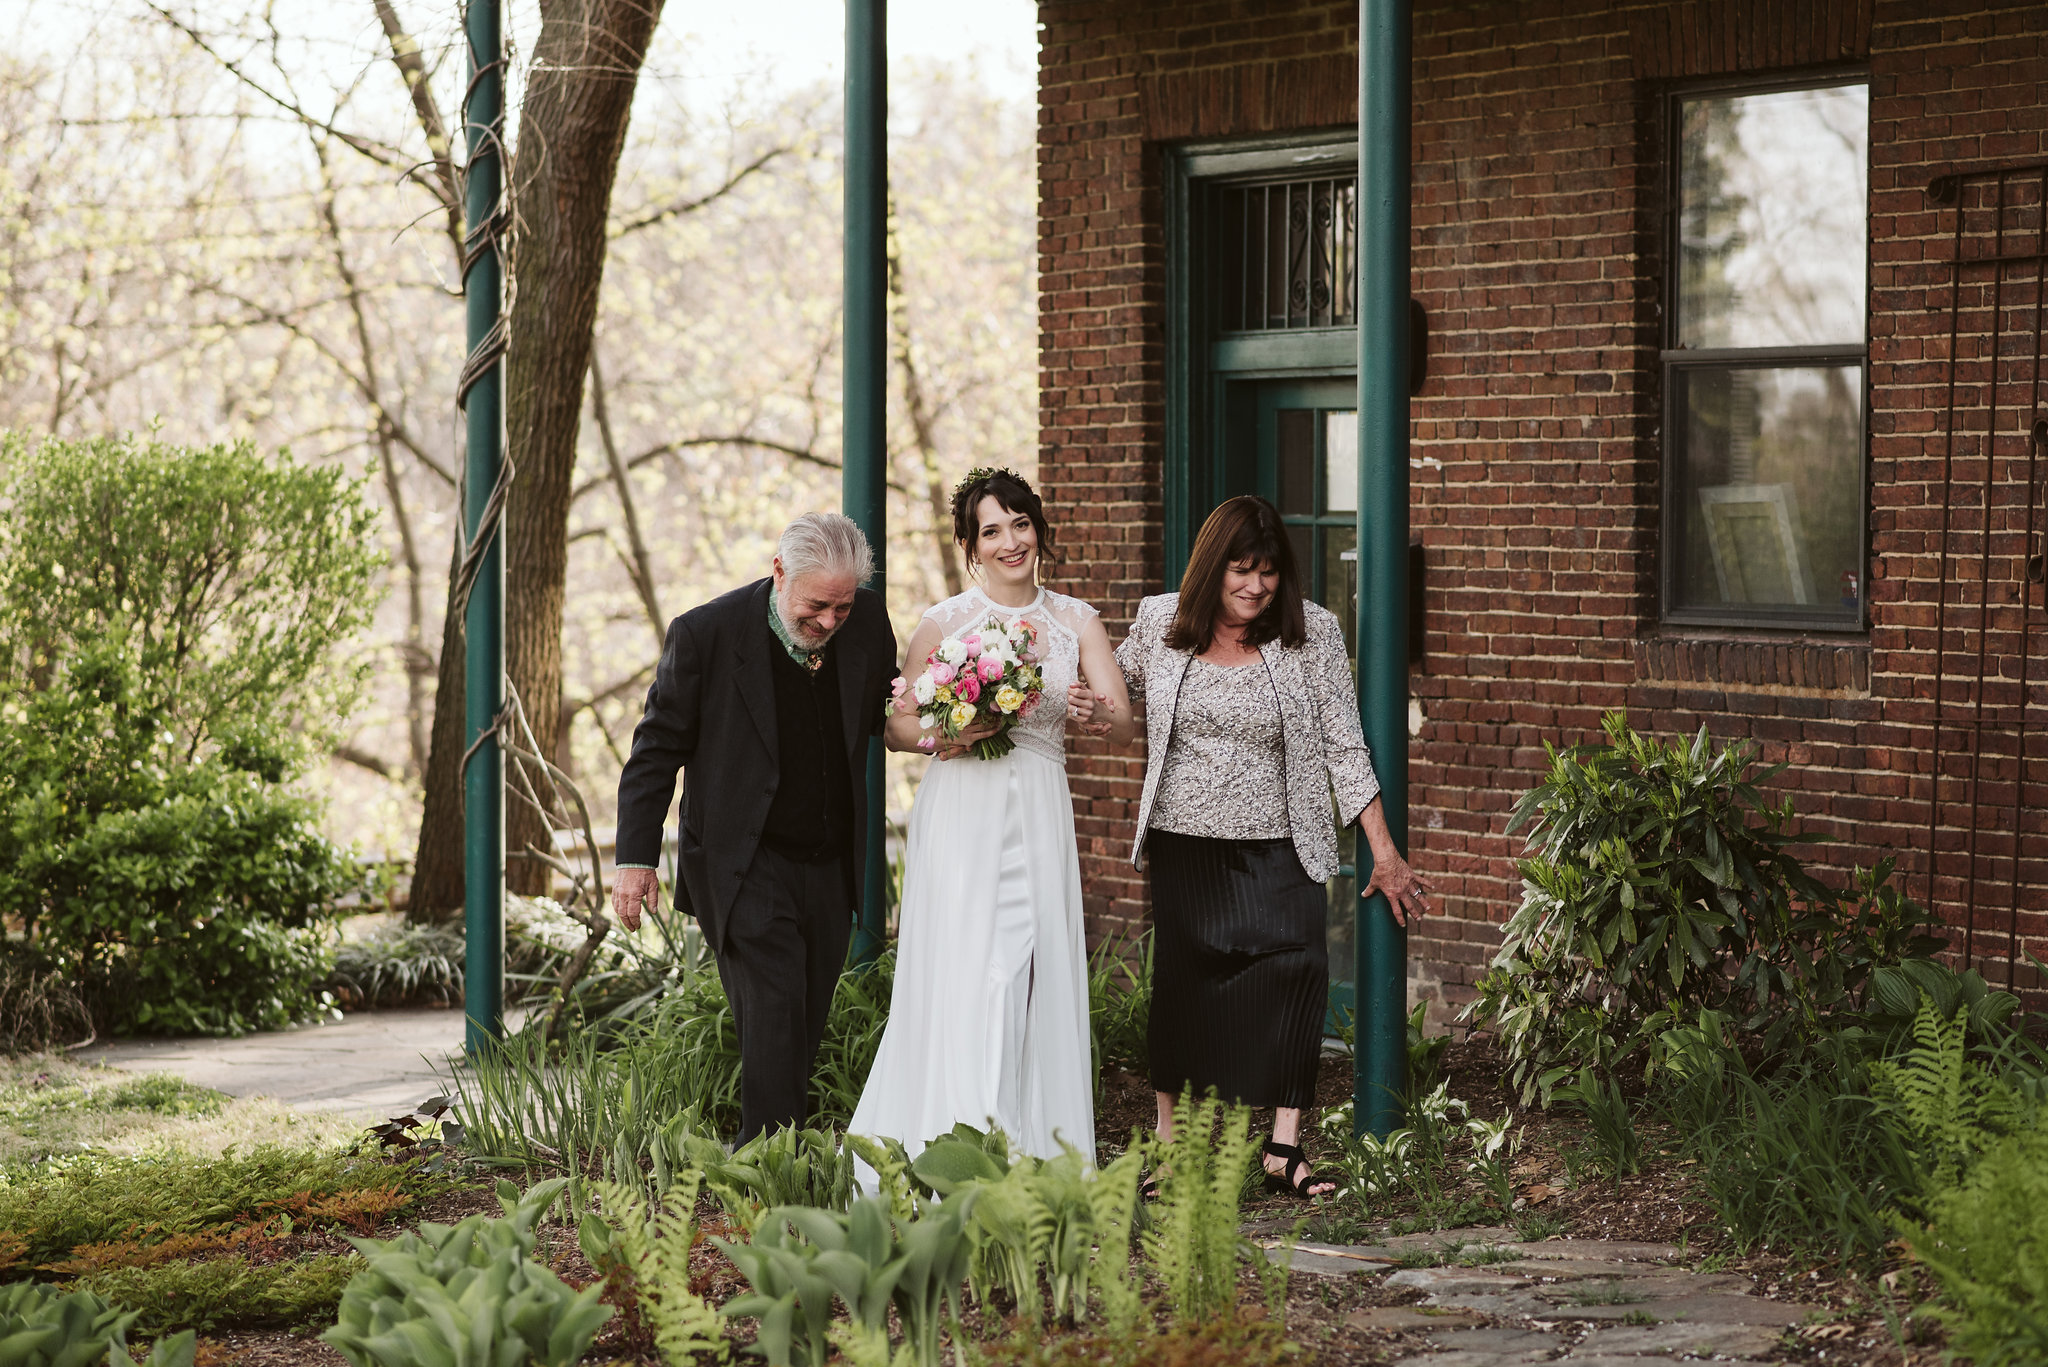  Baltimore, Maryland Wedding Photographer, Hampden, Eco-Friendly, Green, The Elm, Simple and Classic, Vintage, Bride Walking Down the Aisle with her Parents 